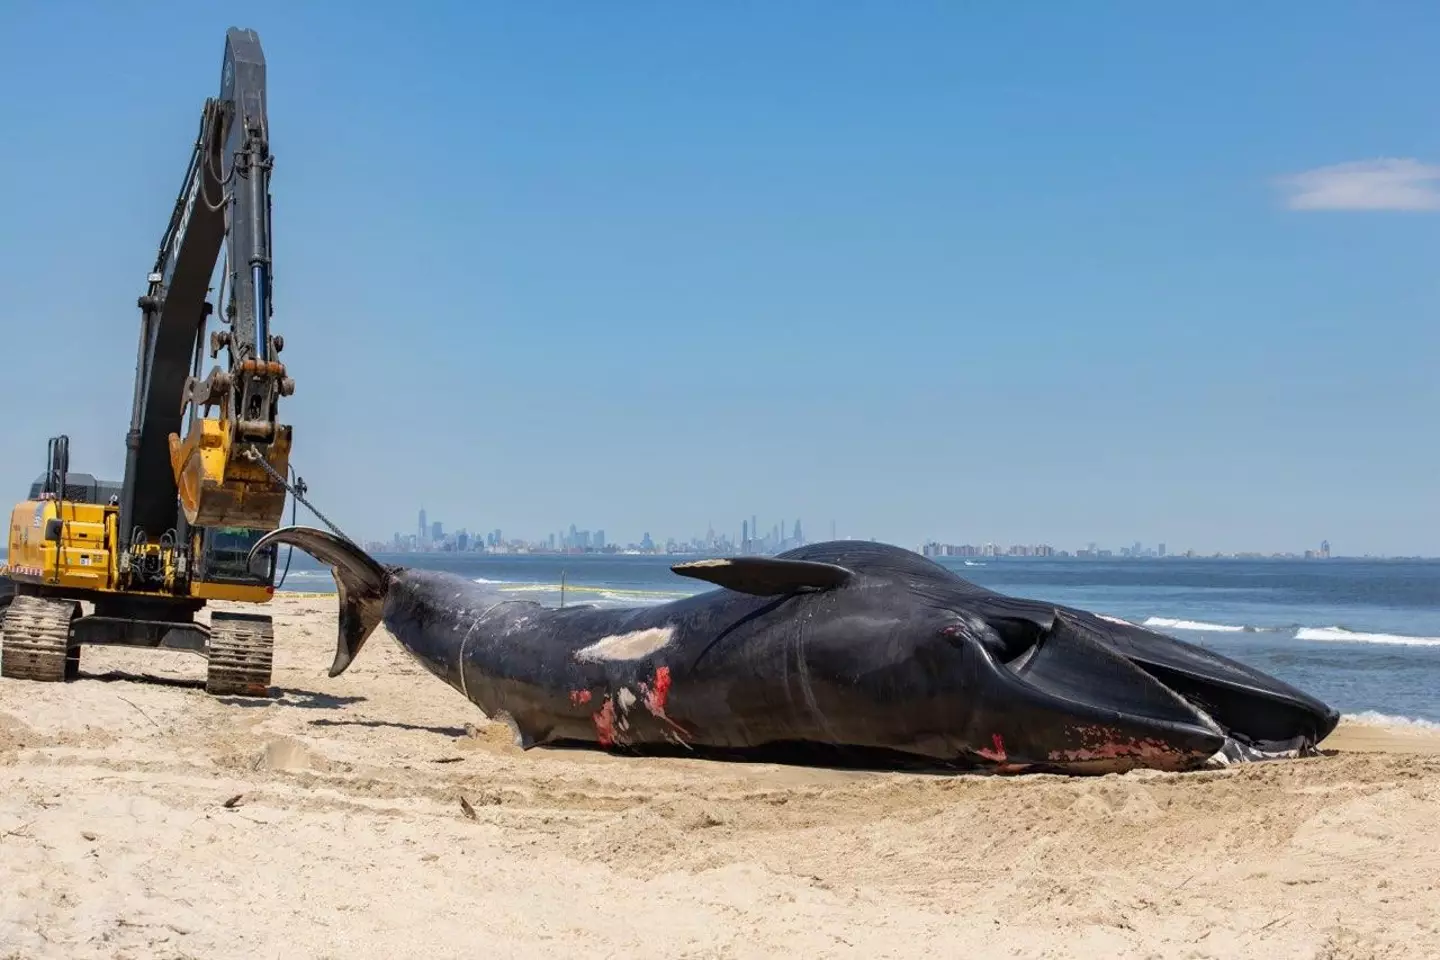 The deceased whale found on the bow of the MSC Cruise ship. (Michael McKenna / Marine Mammal Stranding Center)